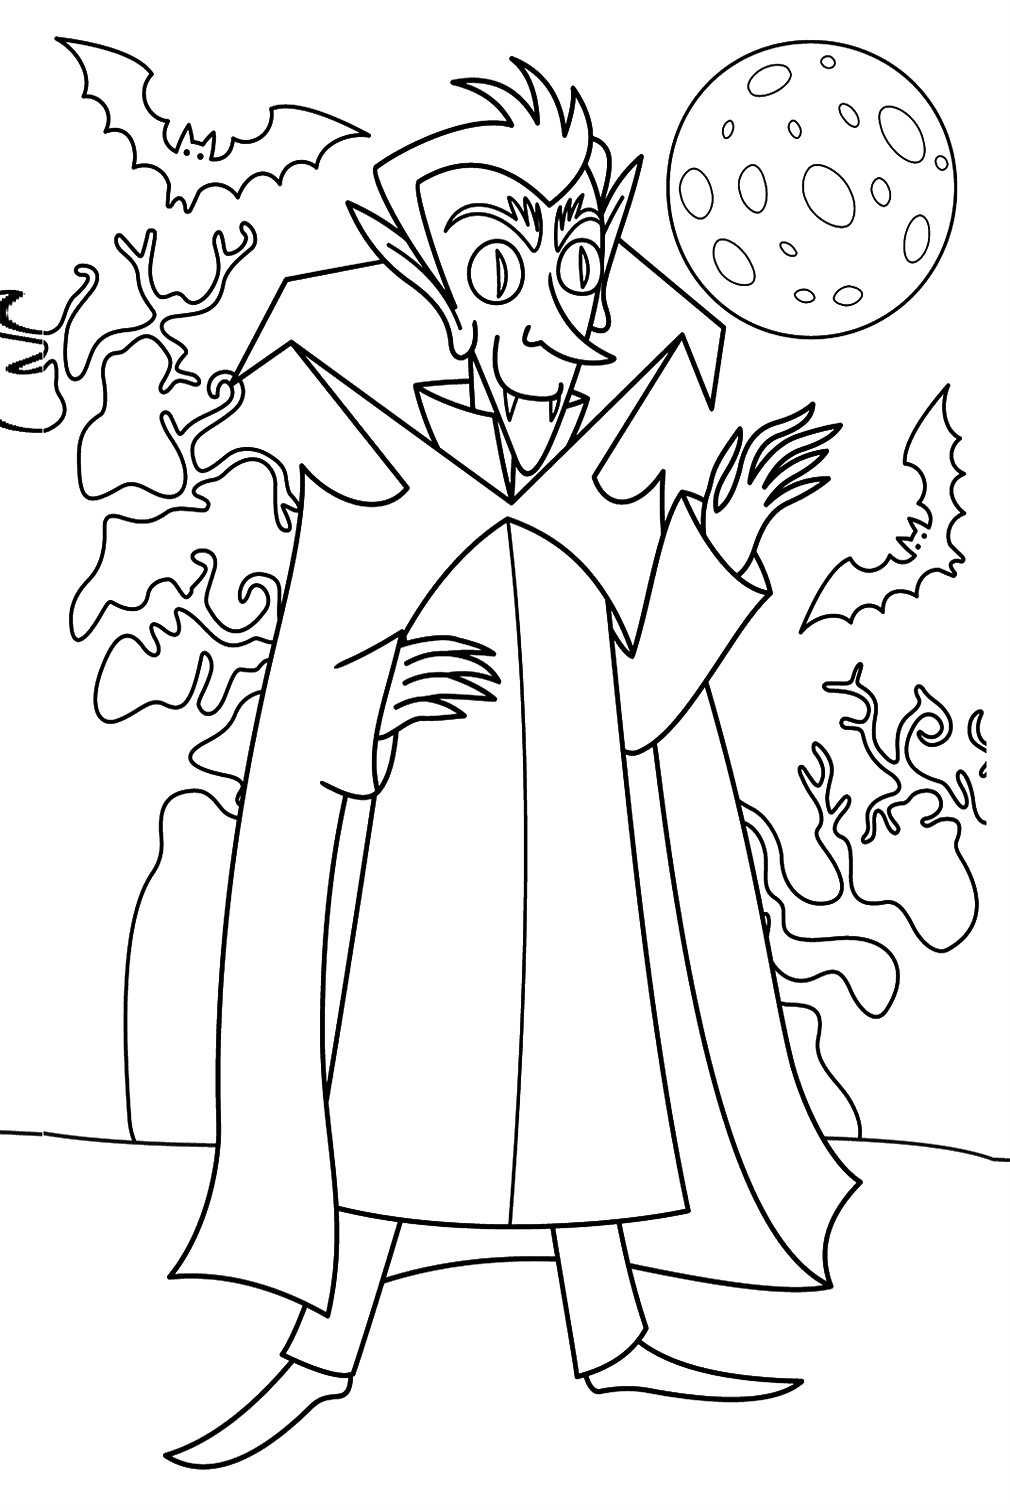 Vampire Coloring Page For Kids from Vampire